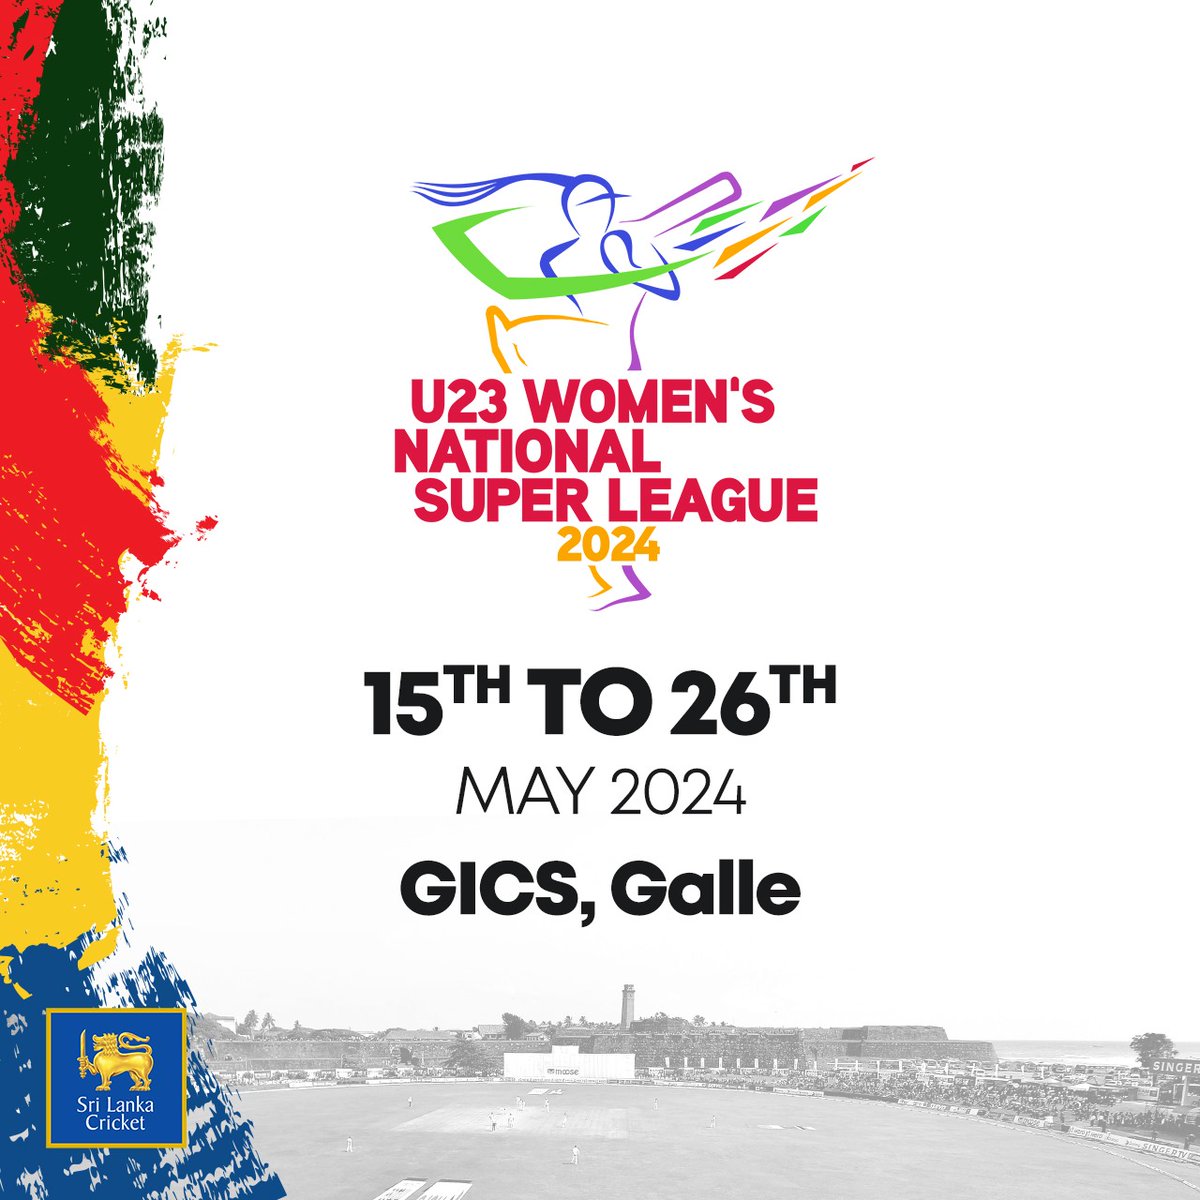 Sri Lanka Cricket will conduct the Women’s National Super League 2024 (U23) T20 Tournament, starting on May 15th. Four teams, namely Colombo, Galle, Kandy, and Dambulla, will compete in the tournament, which will be played at the GICS in Galle. Squads and Fixture -…